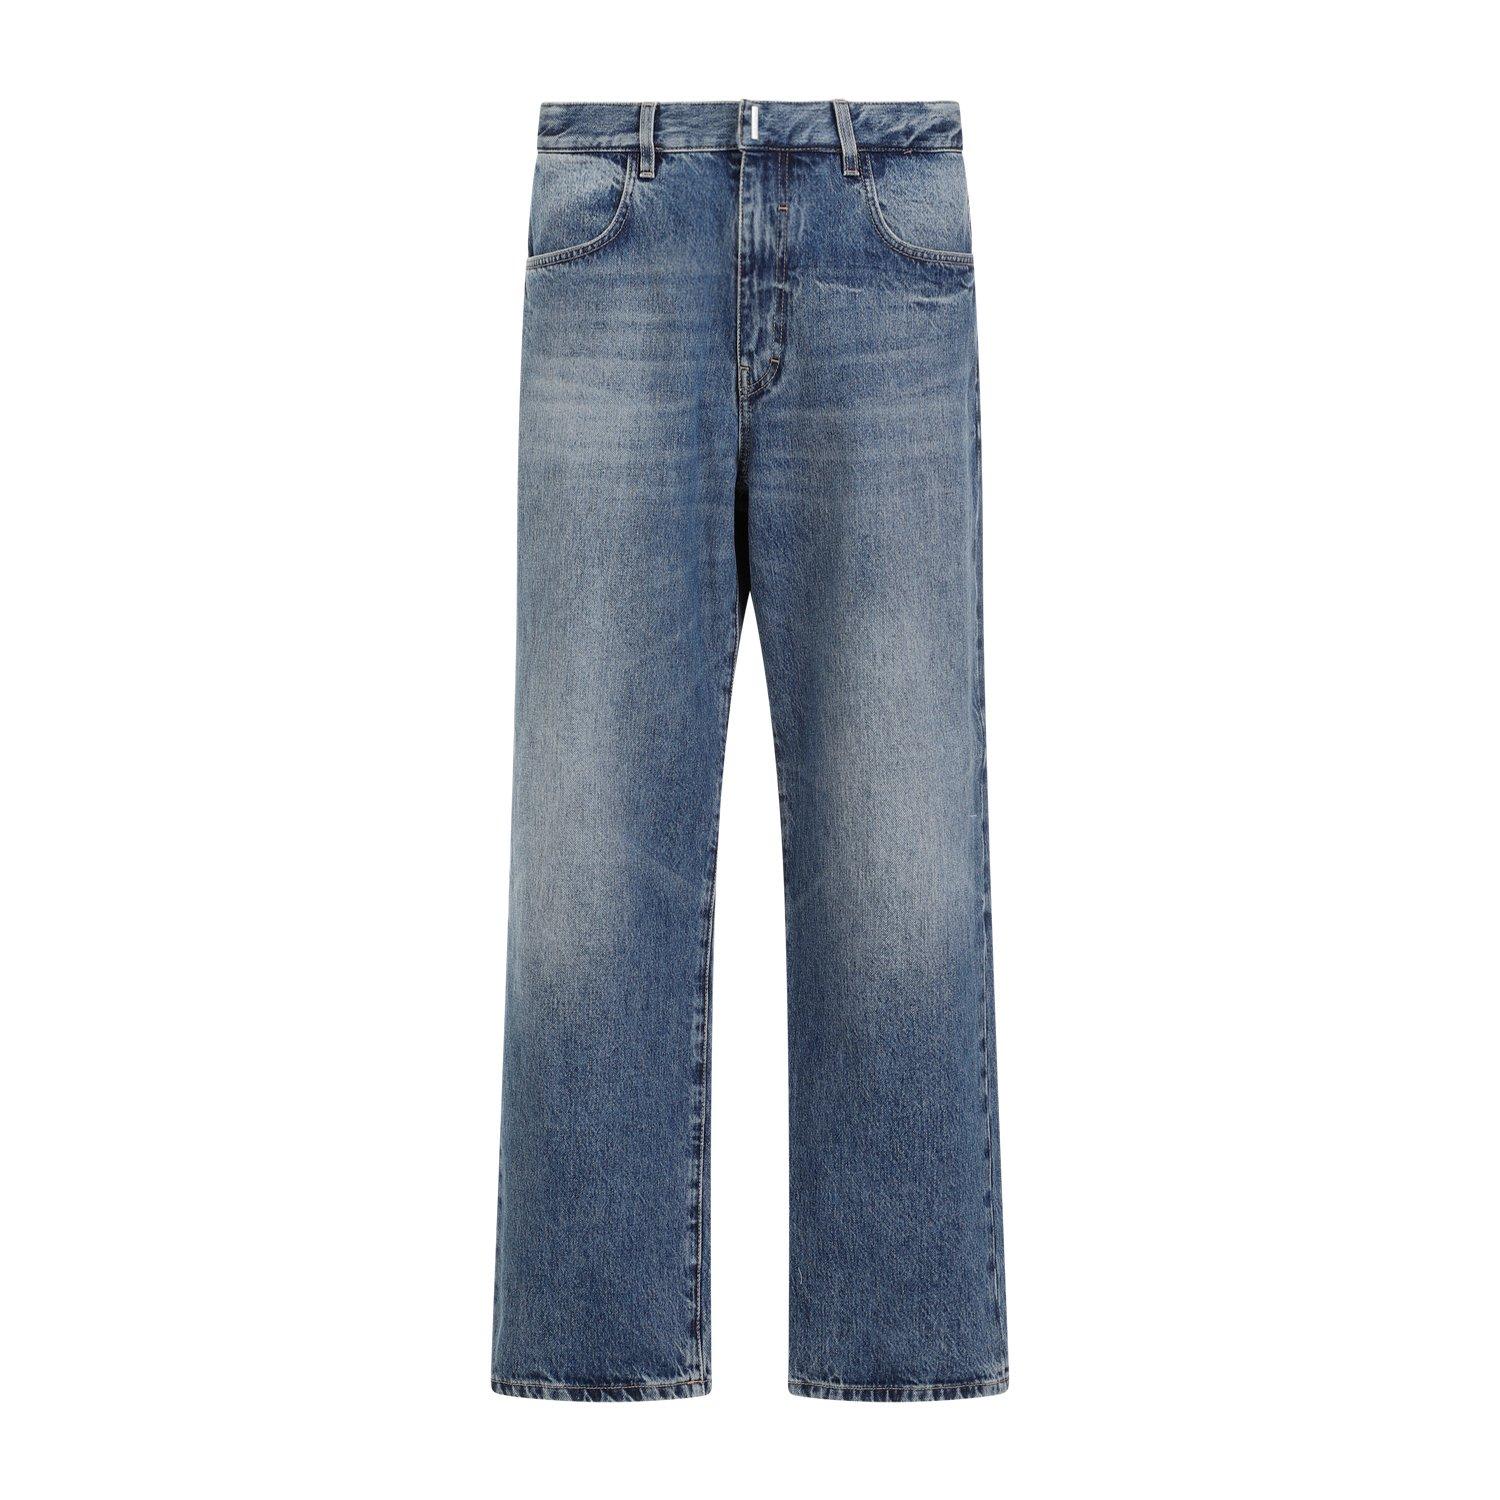 GIVENCHY LOGO PLAQUE STRAIGHT-LEG JEANS